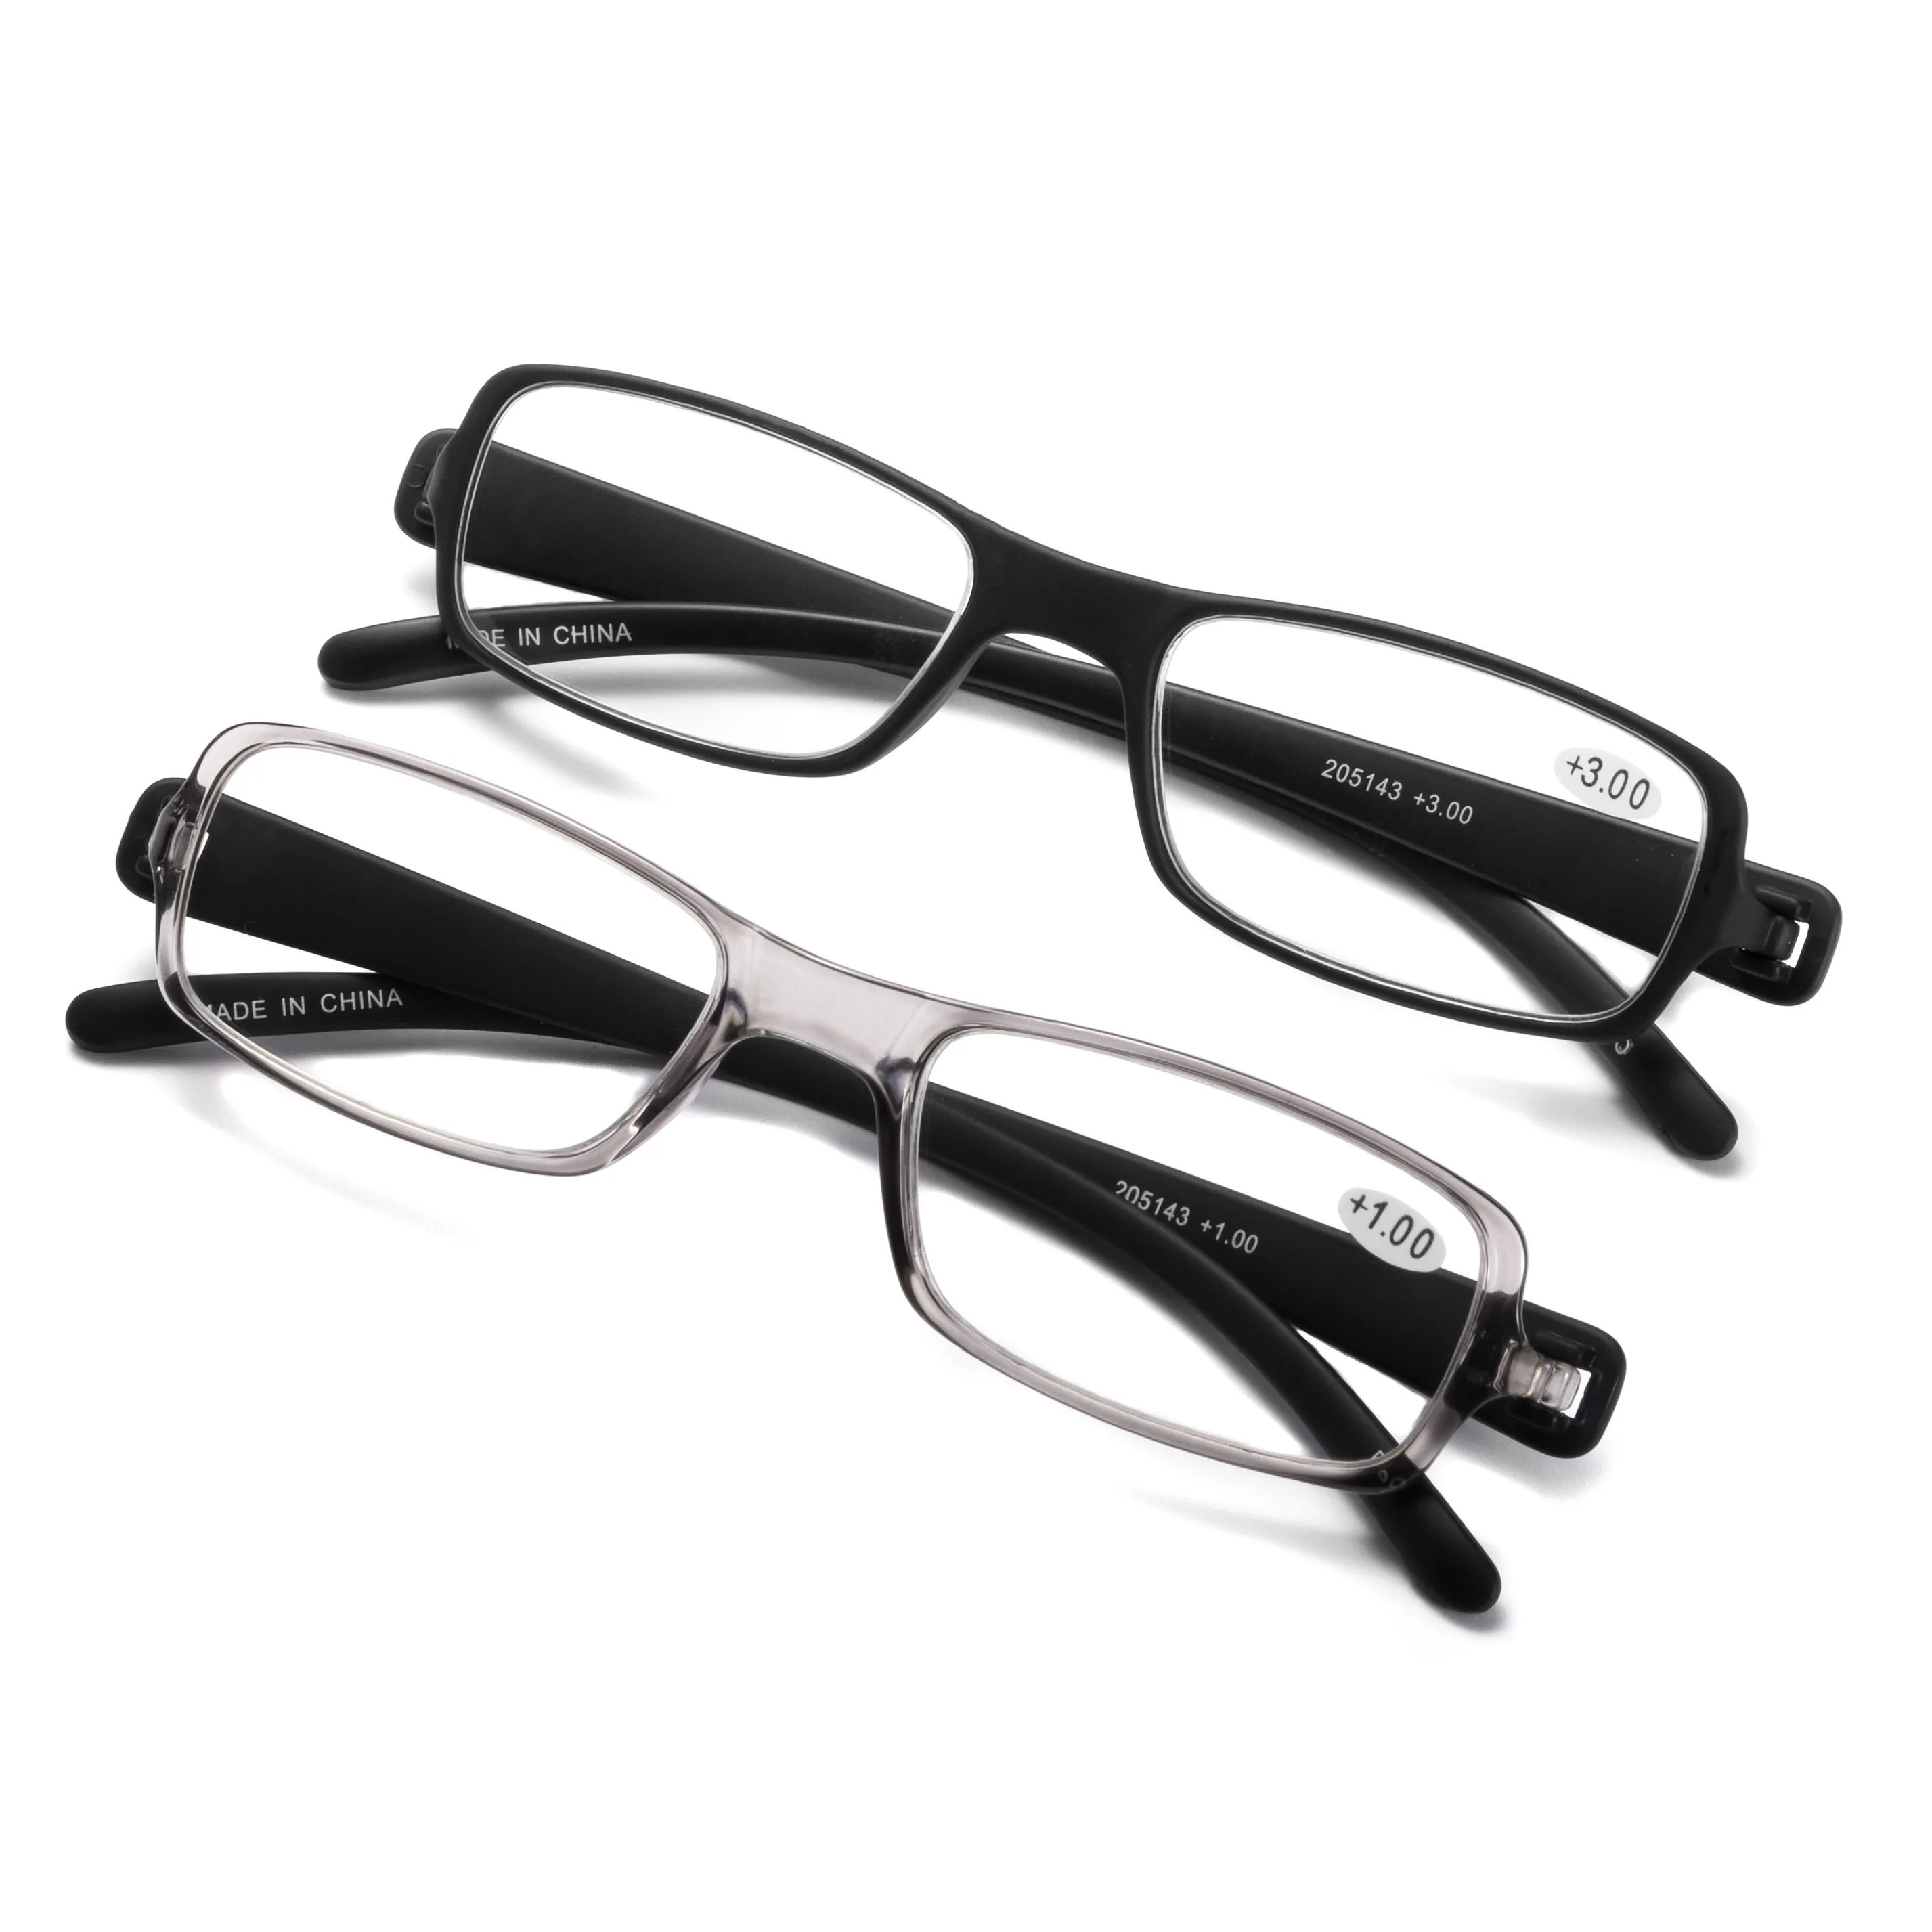 

Kaibote Lightweight Reading Glasses for Men Women Frames Memory Plastic Flexible Presbyopic Eyeglasses +1.0 to +3.5 with Pouch